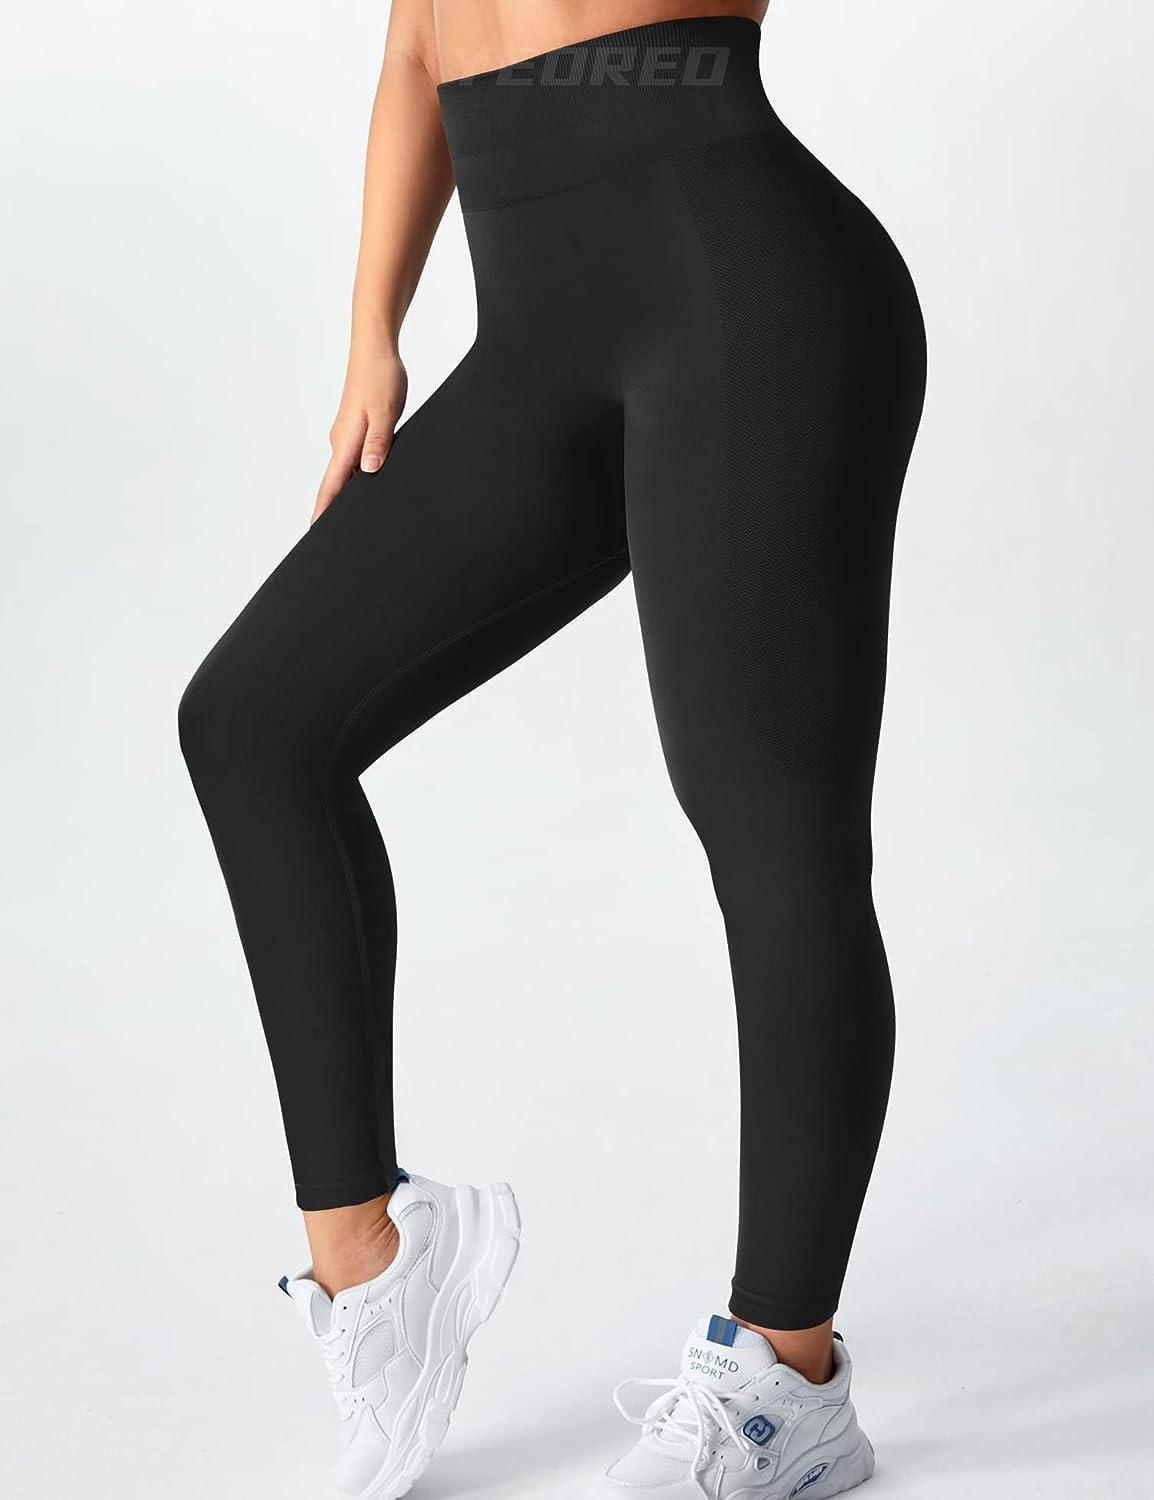  2021 New Feels Buttery Soft and Weightlessl Nulu Fabric Yoga  Step Foot Pants Women's High Waist Peach Hip Sports Fitness Legging (Black,  XS) : Clothing, Shoes & Jewelry